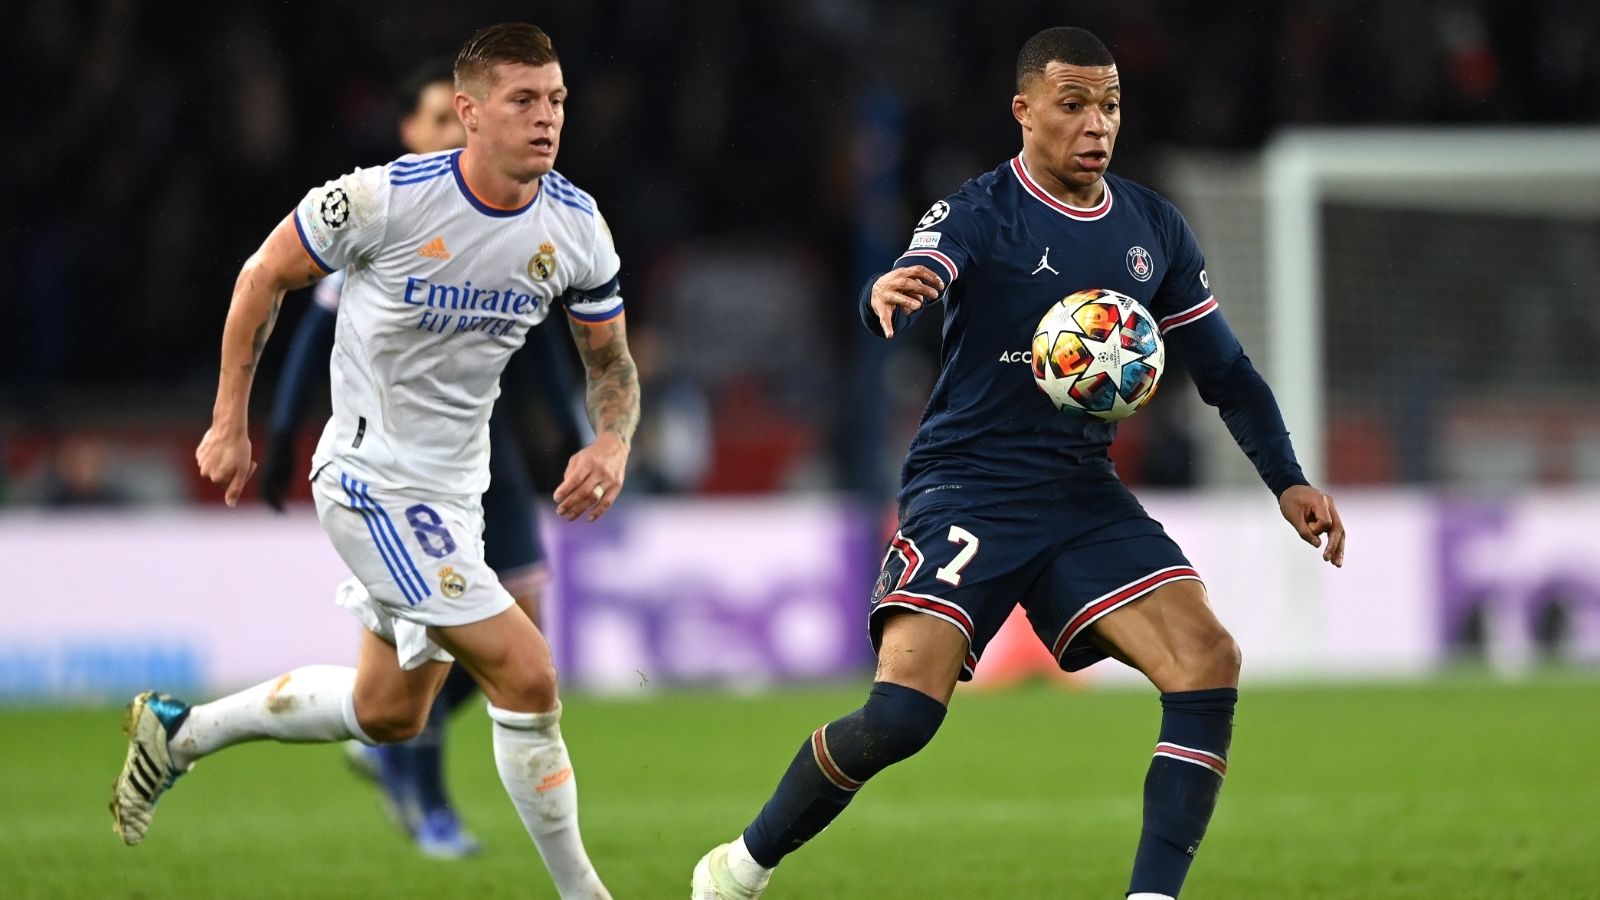 Real Madrid fans are planning a display of support for Mbappe in order to persuade the PSG star to sign a free transfer